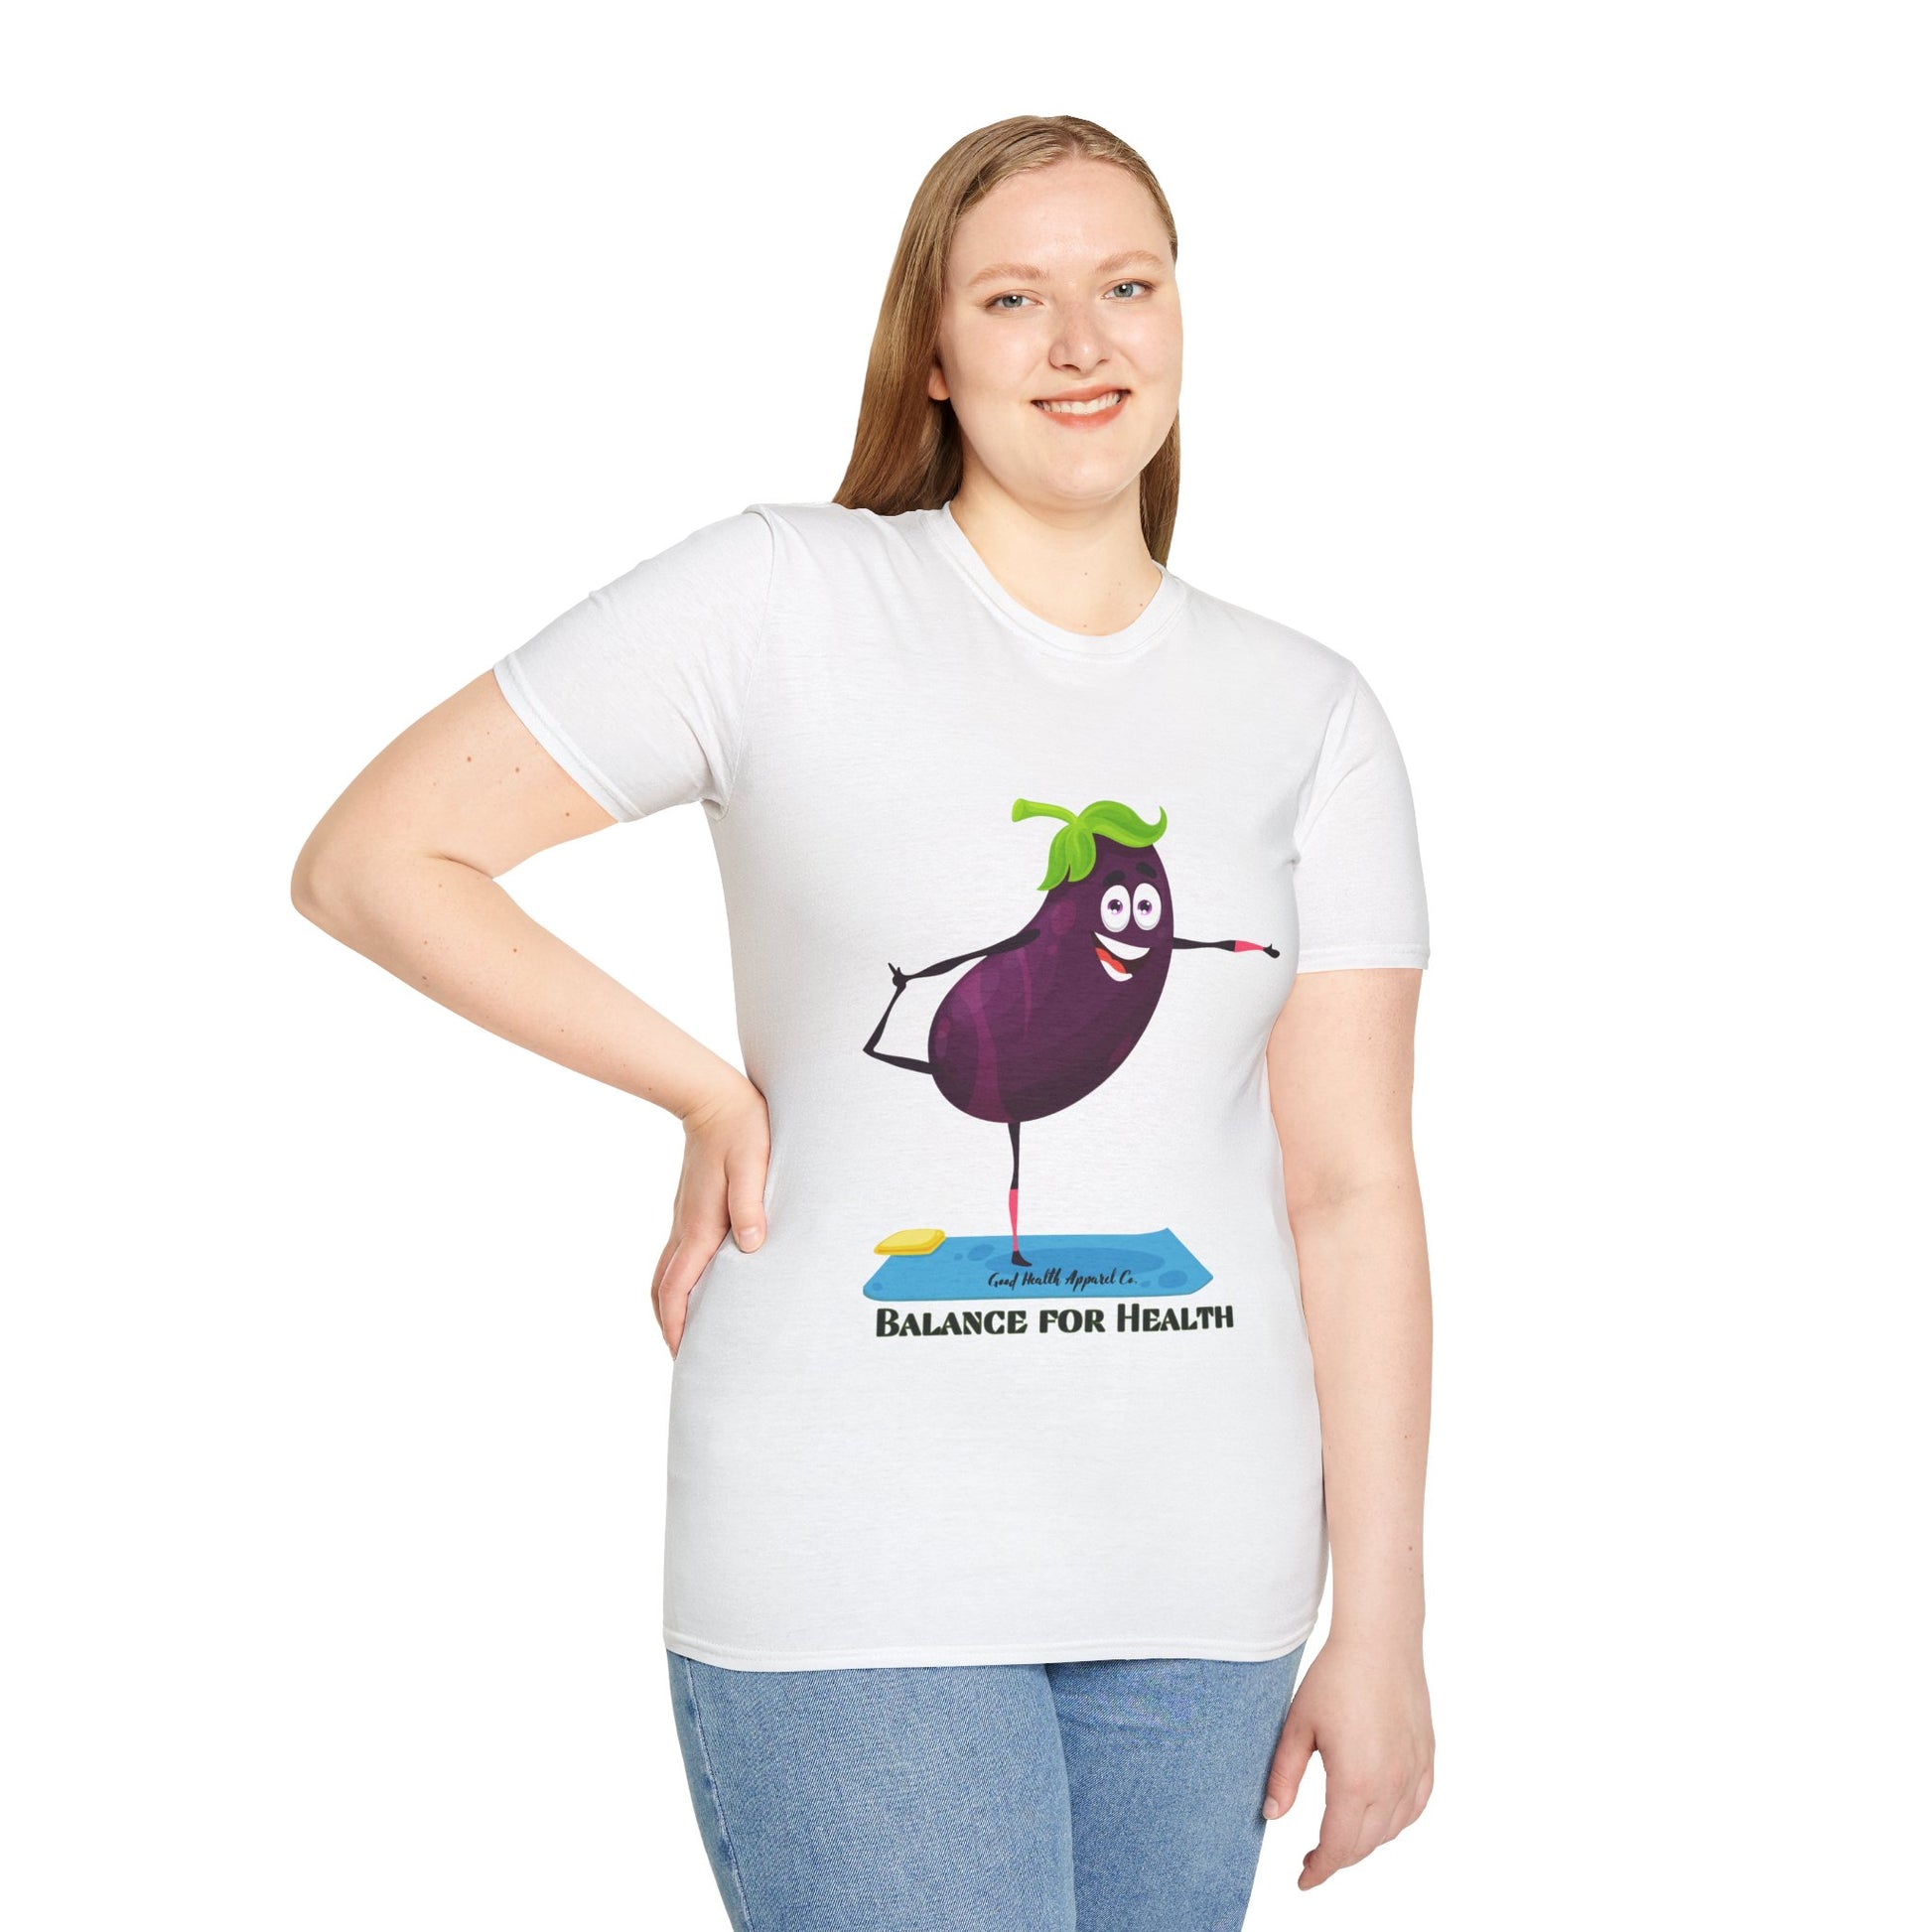 A woman in a white shirt with a cartoon eggplant design poses, showcasing the Eggplant Balance for Health Unisex T-Shirt. Made of soft 100% cotton, featuring twill tape shoulders for durability and a ribbed collar.